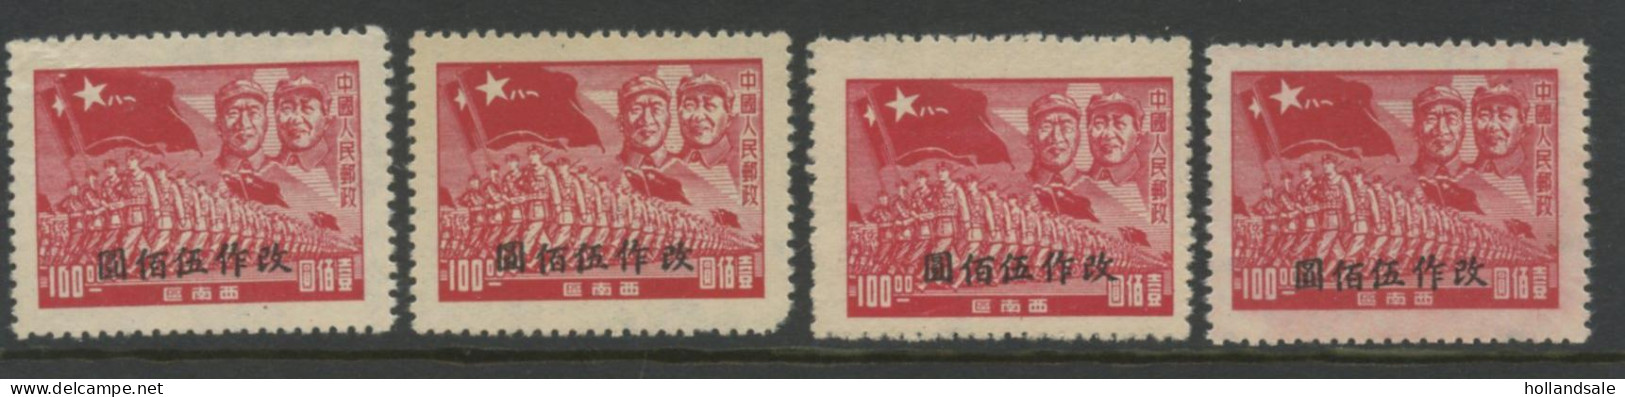 CHINA SOUTH WEST - 1950 $500 On $100 MICHEL # 36. Four (4) X. Unused. - Chine Du Sud-Ouest 1949-50